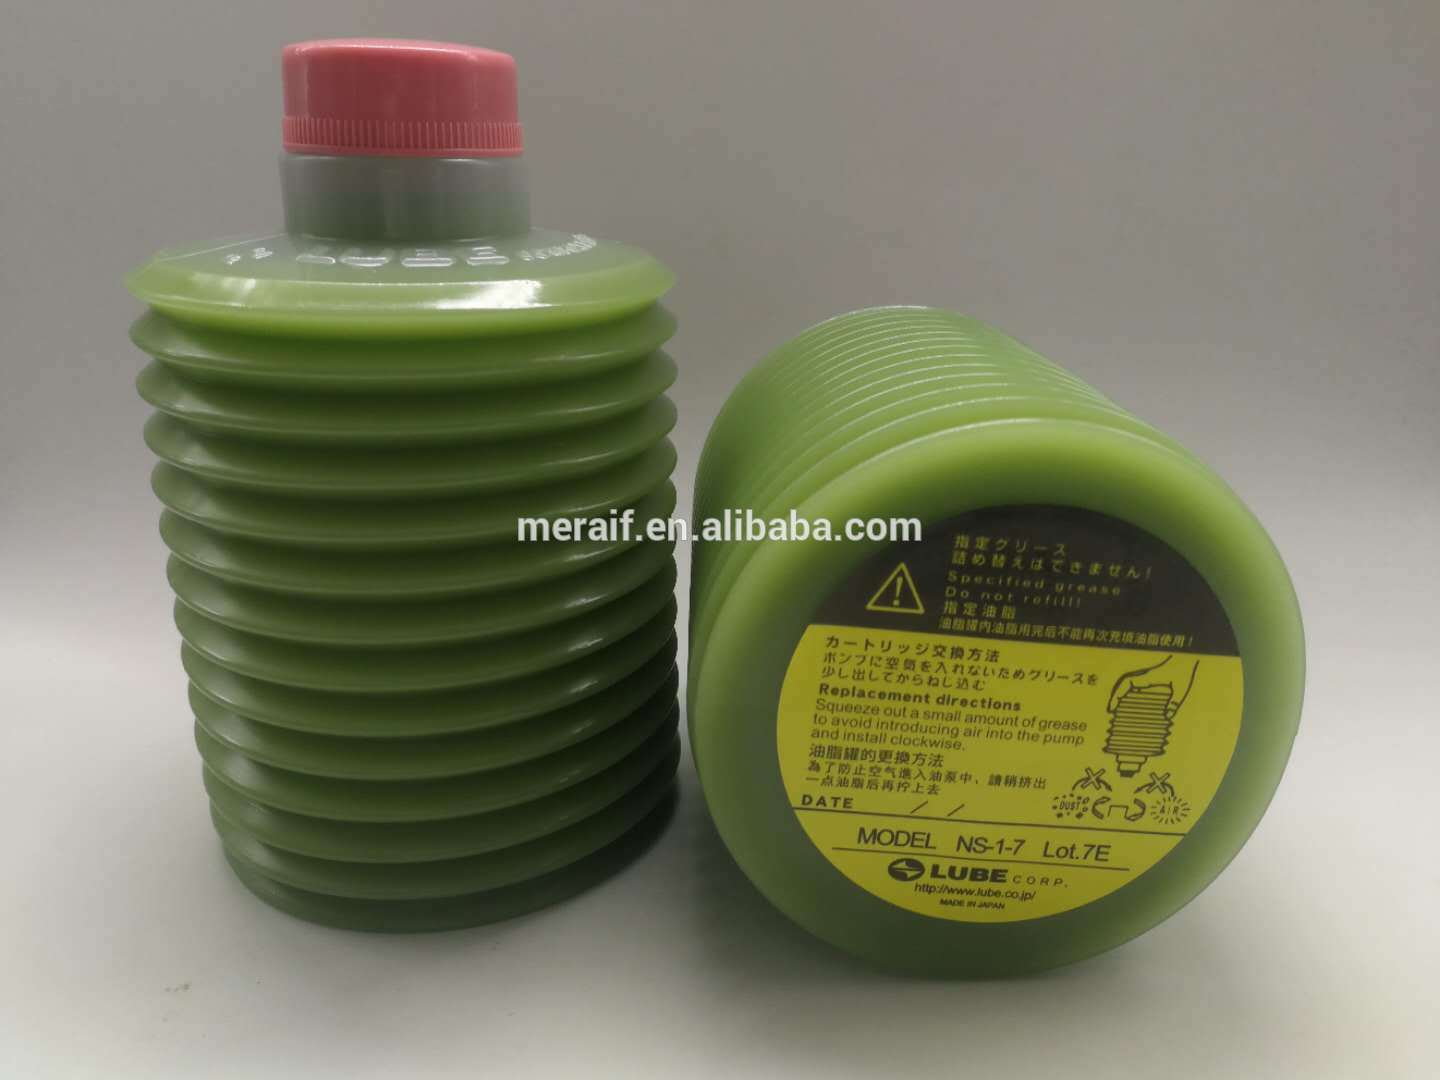 Original LUB SMT grease MY2-7 Grease & Lubricant use for SMT machine